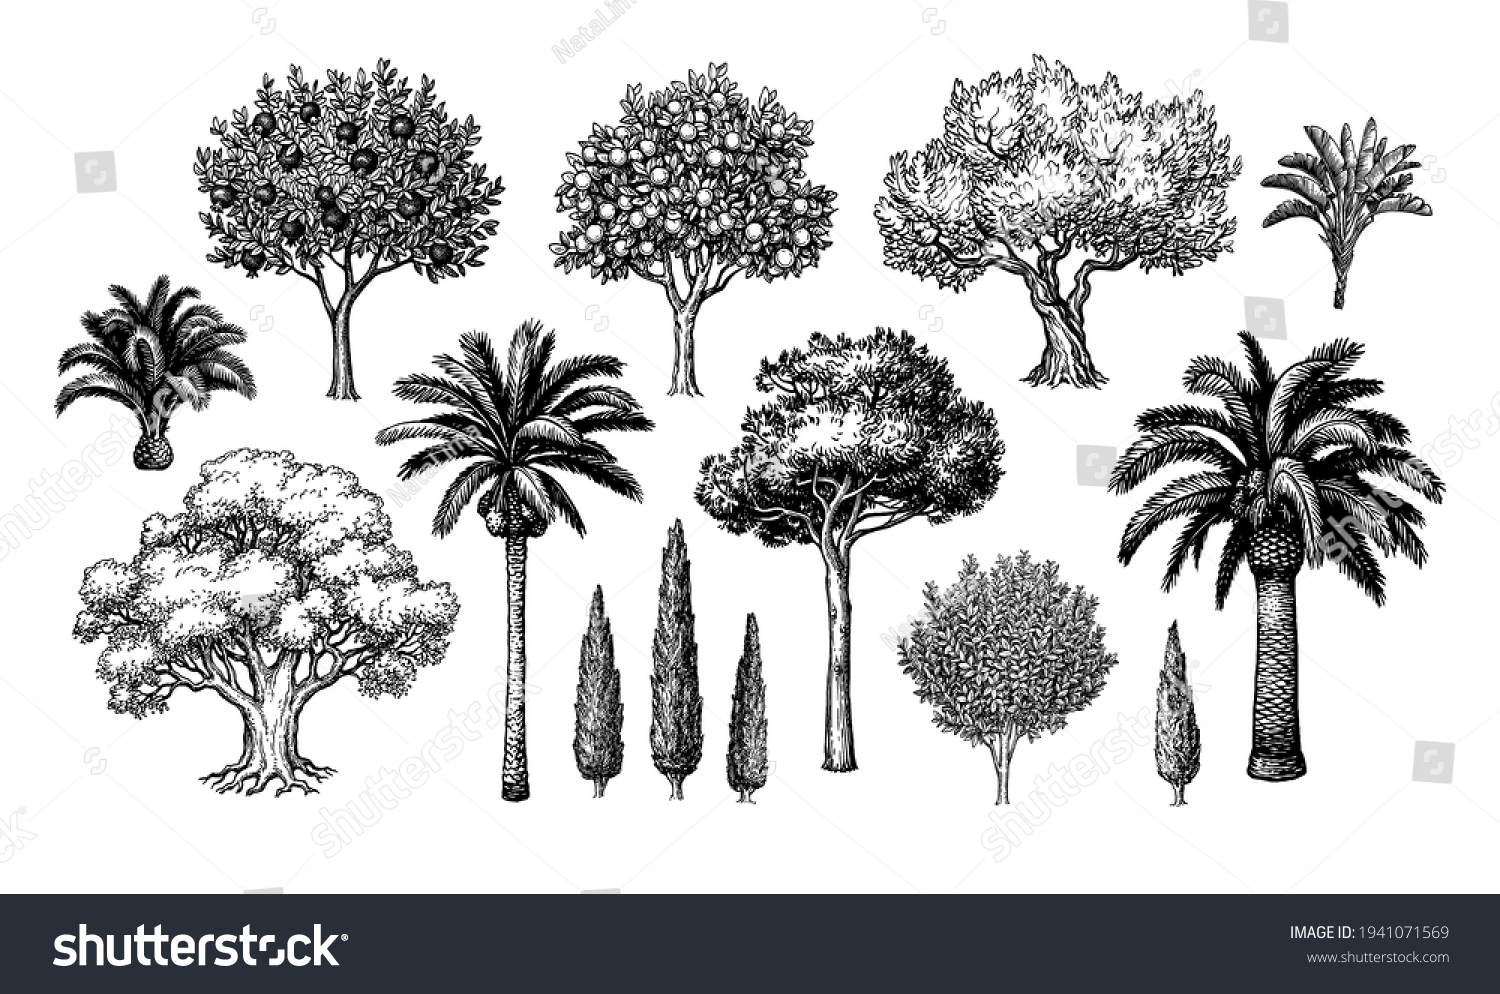 SVG of Mediterranean trees. Big collection. Ink sketch isolated on white background. Hand drawn vector illustration. Retro style. svg